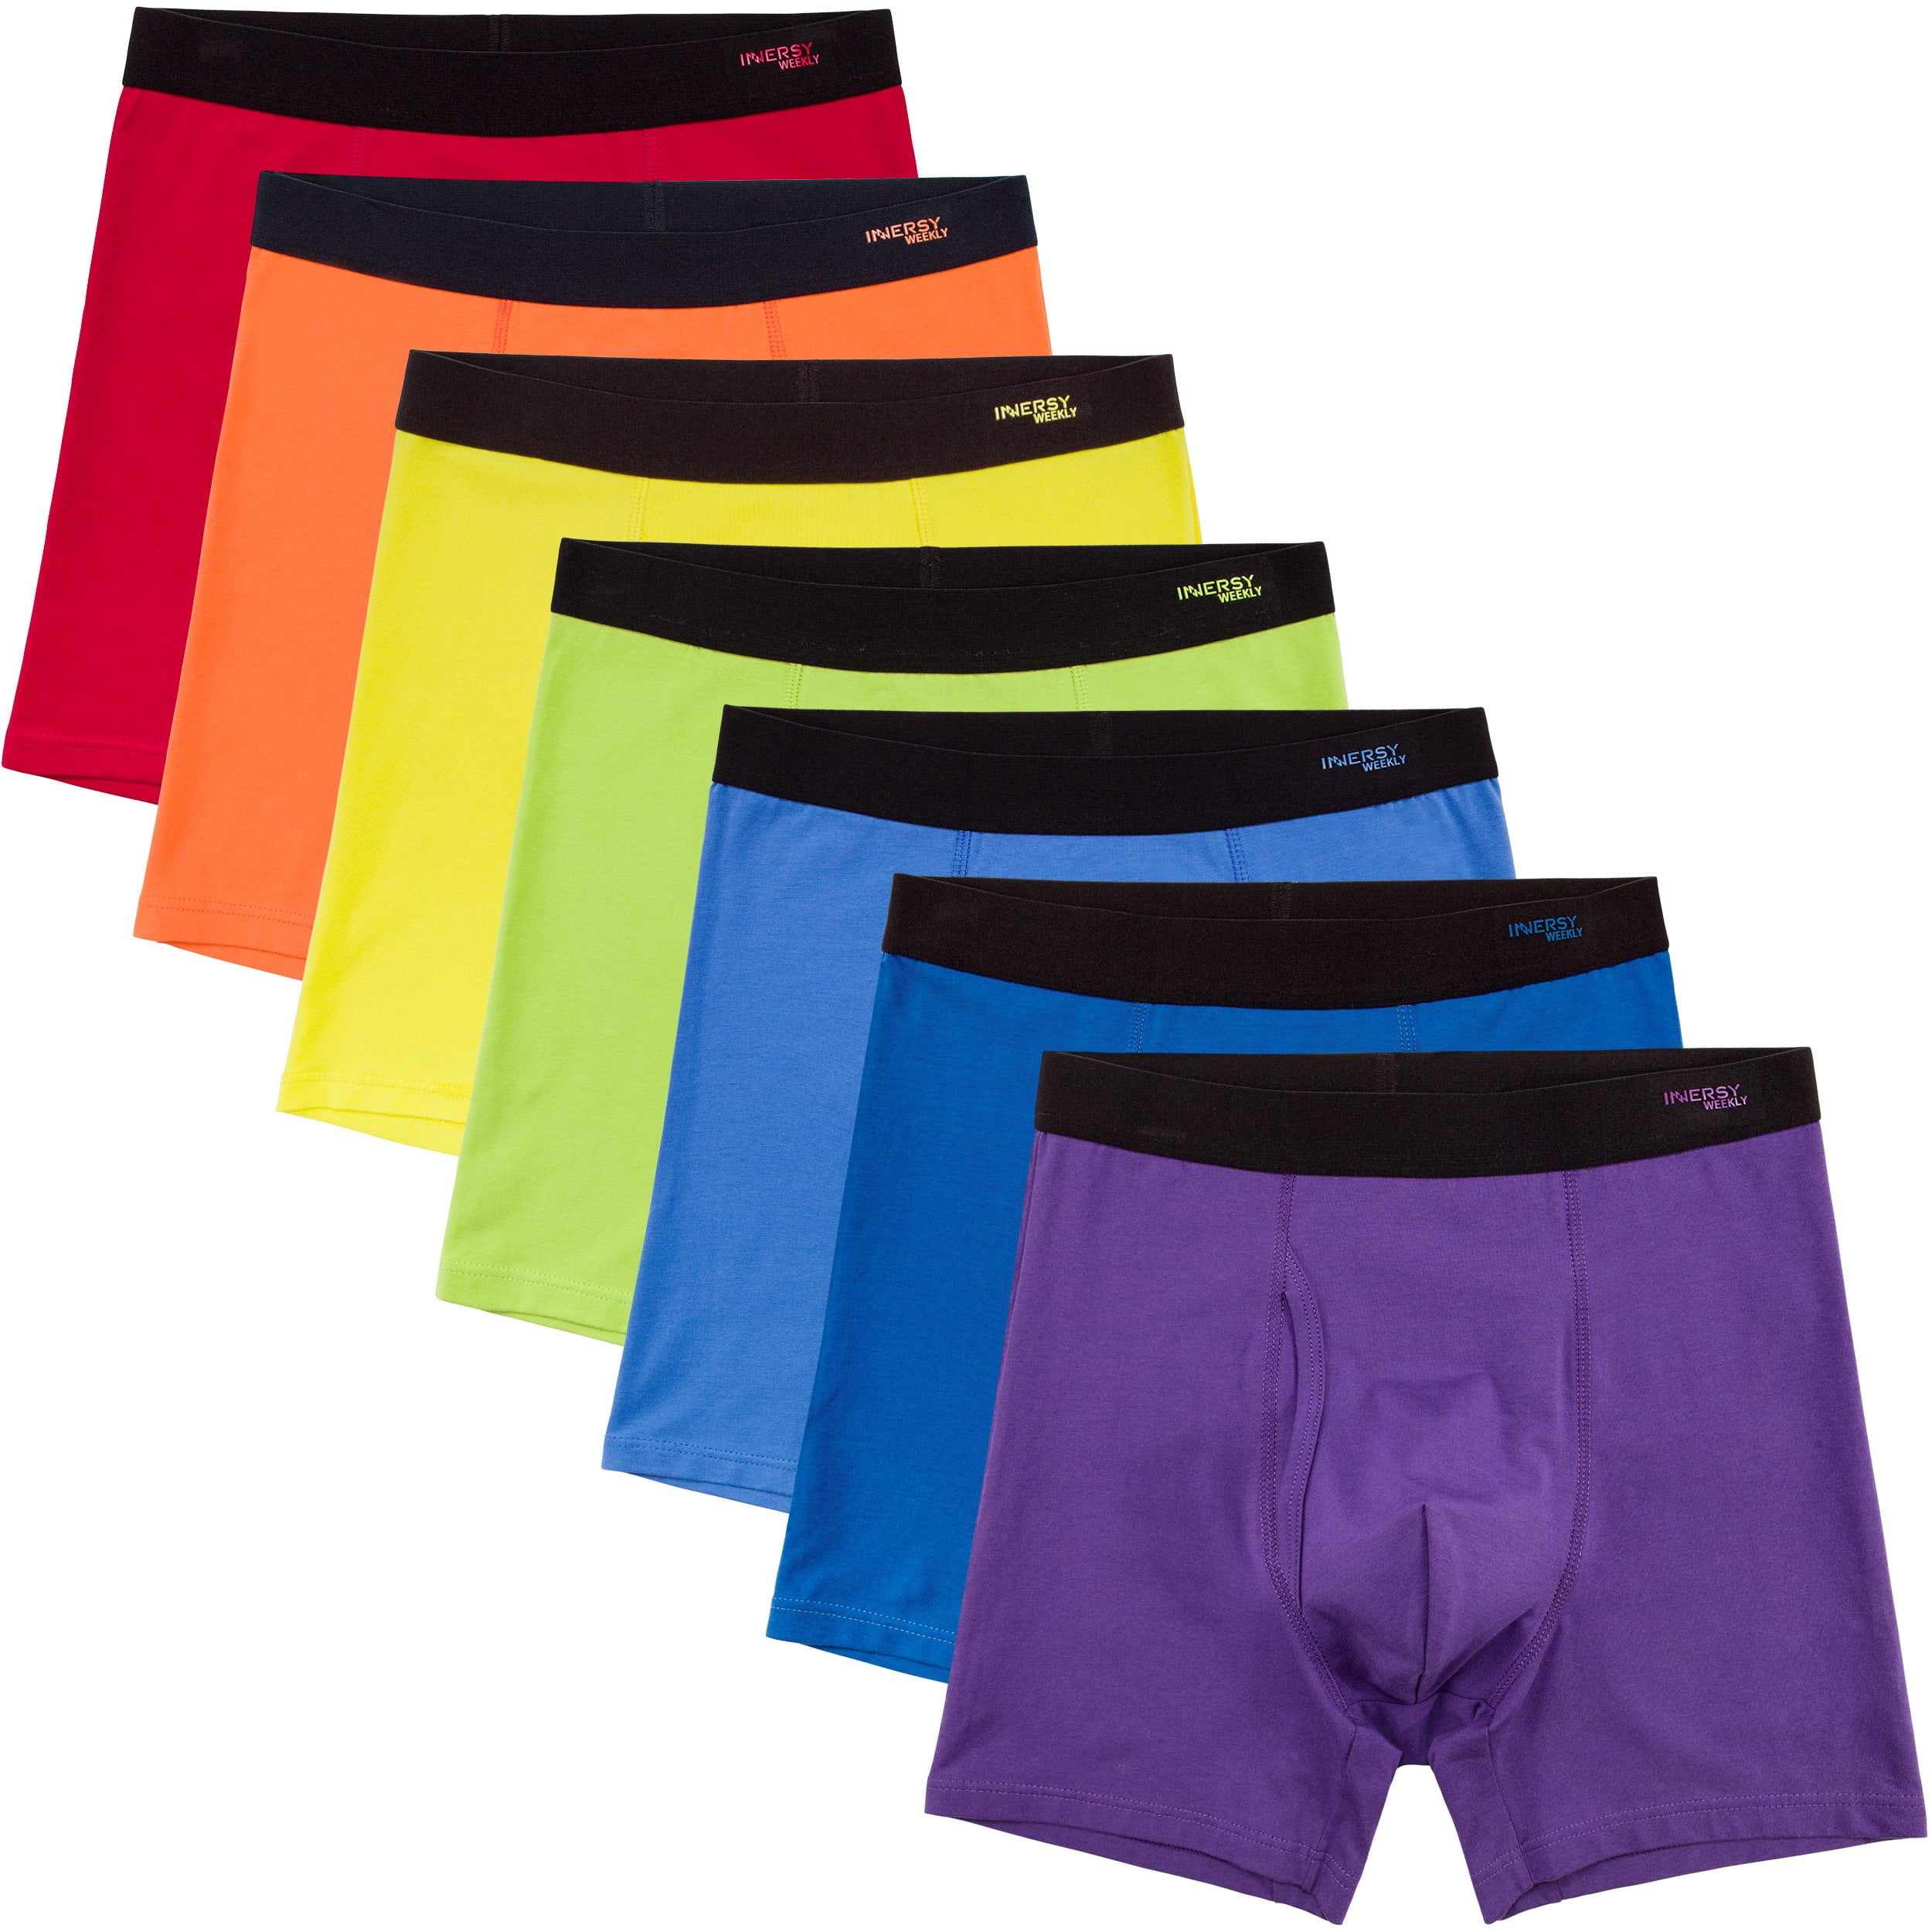 7 Pack Men's Boxer Shorts Trunks 7 Days Of The Week Underwear Boxers Brief New 